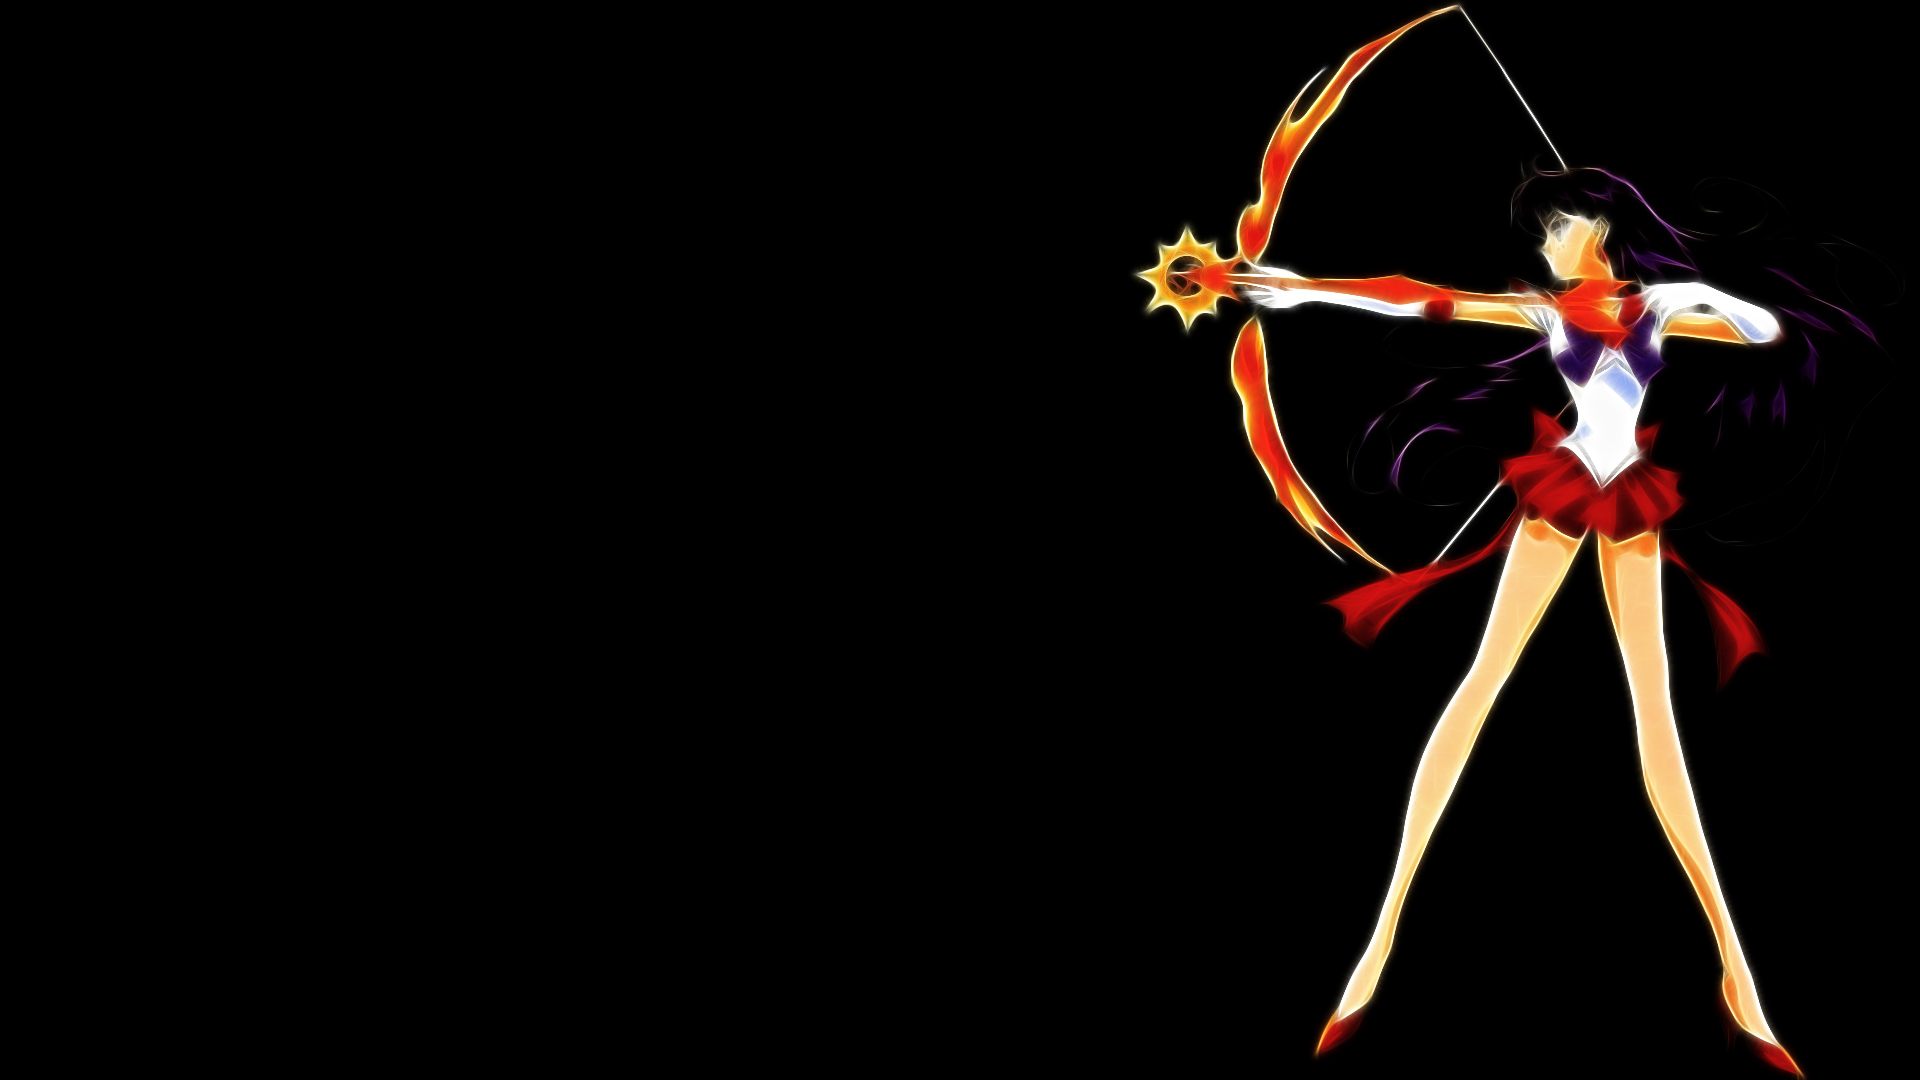 Best Sailor Moon Wallpaper For Android